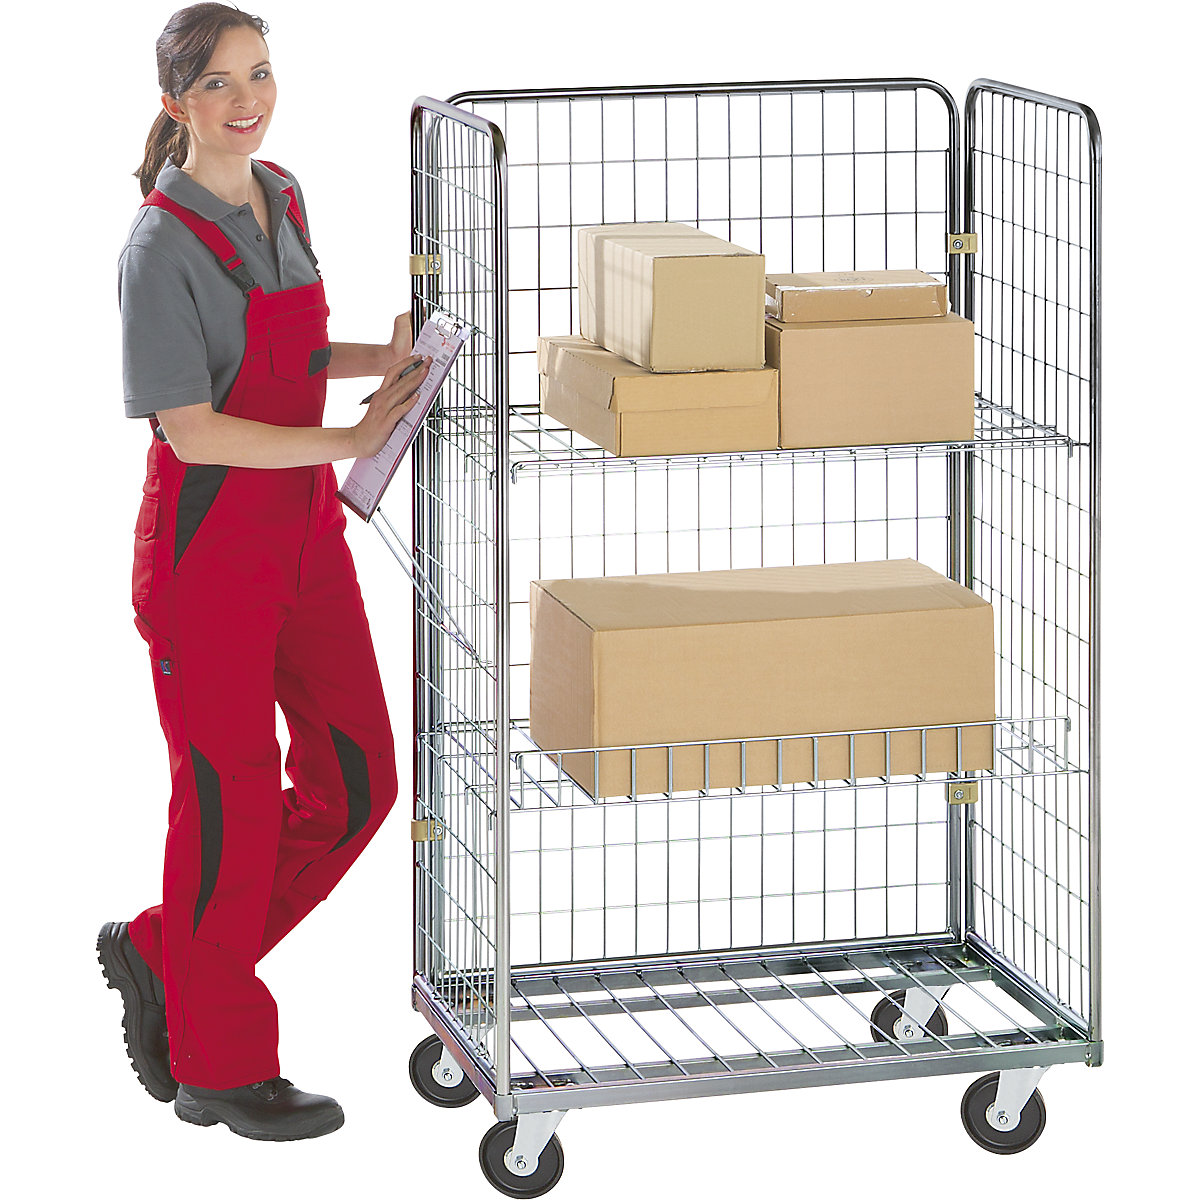 Roll containers, order picking trolley, WxD 1295 x 600 mm, height 1585 mm, wheel Ø 100 mm, 10+ items-2